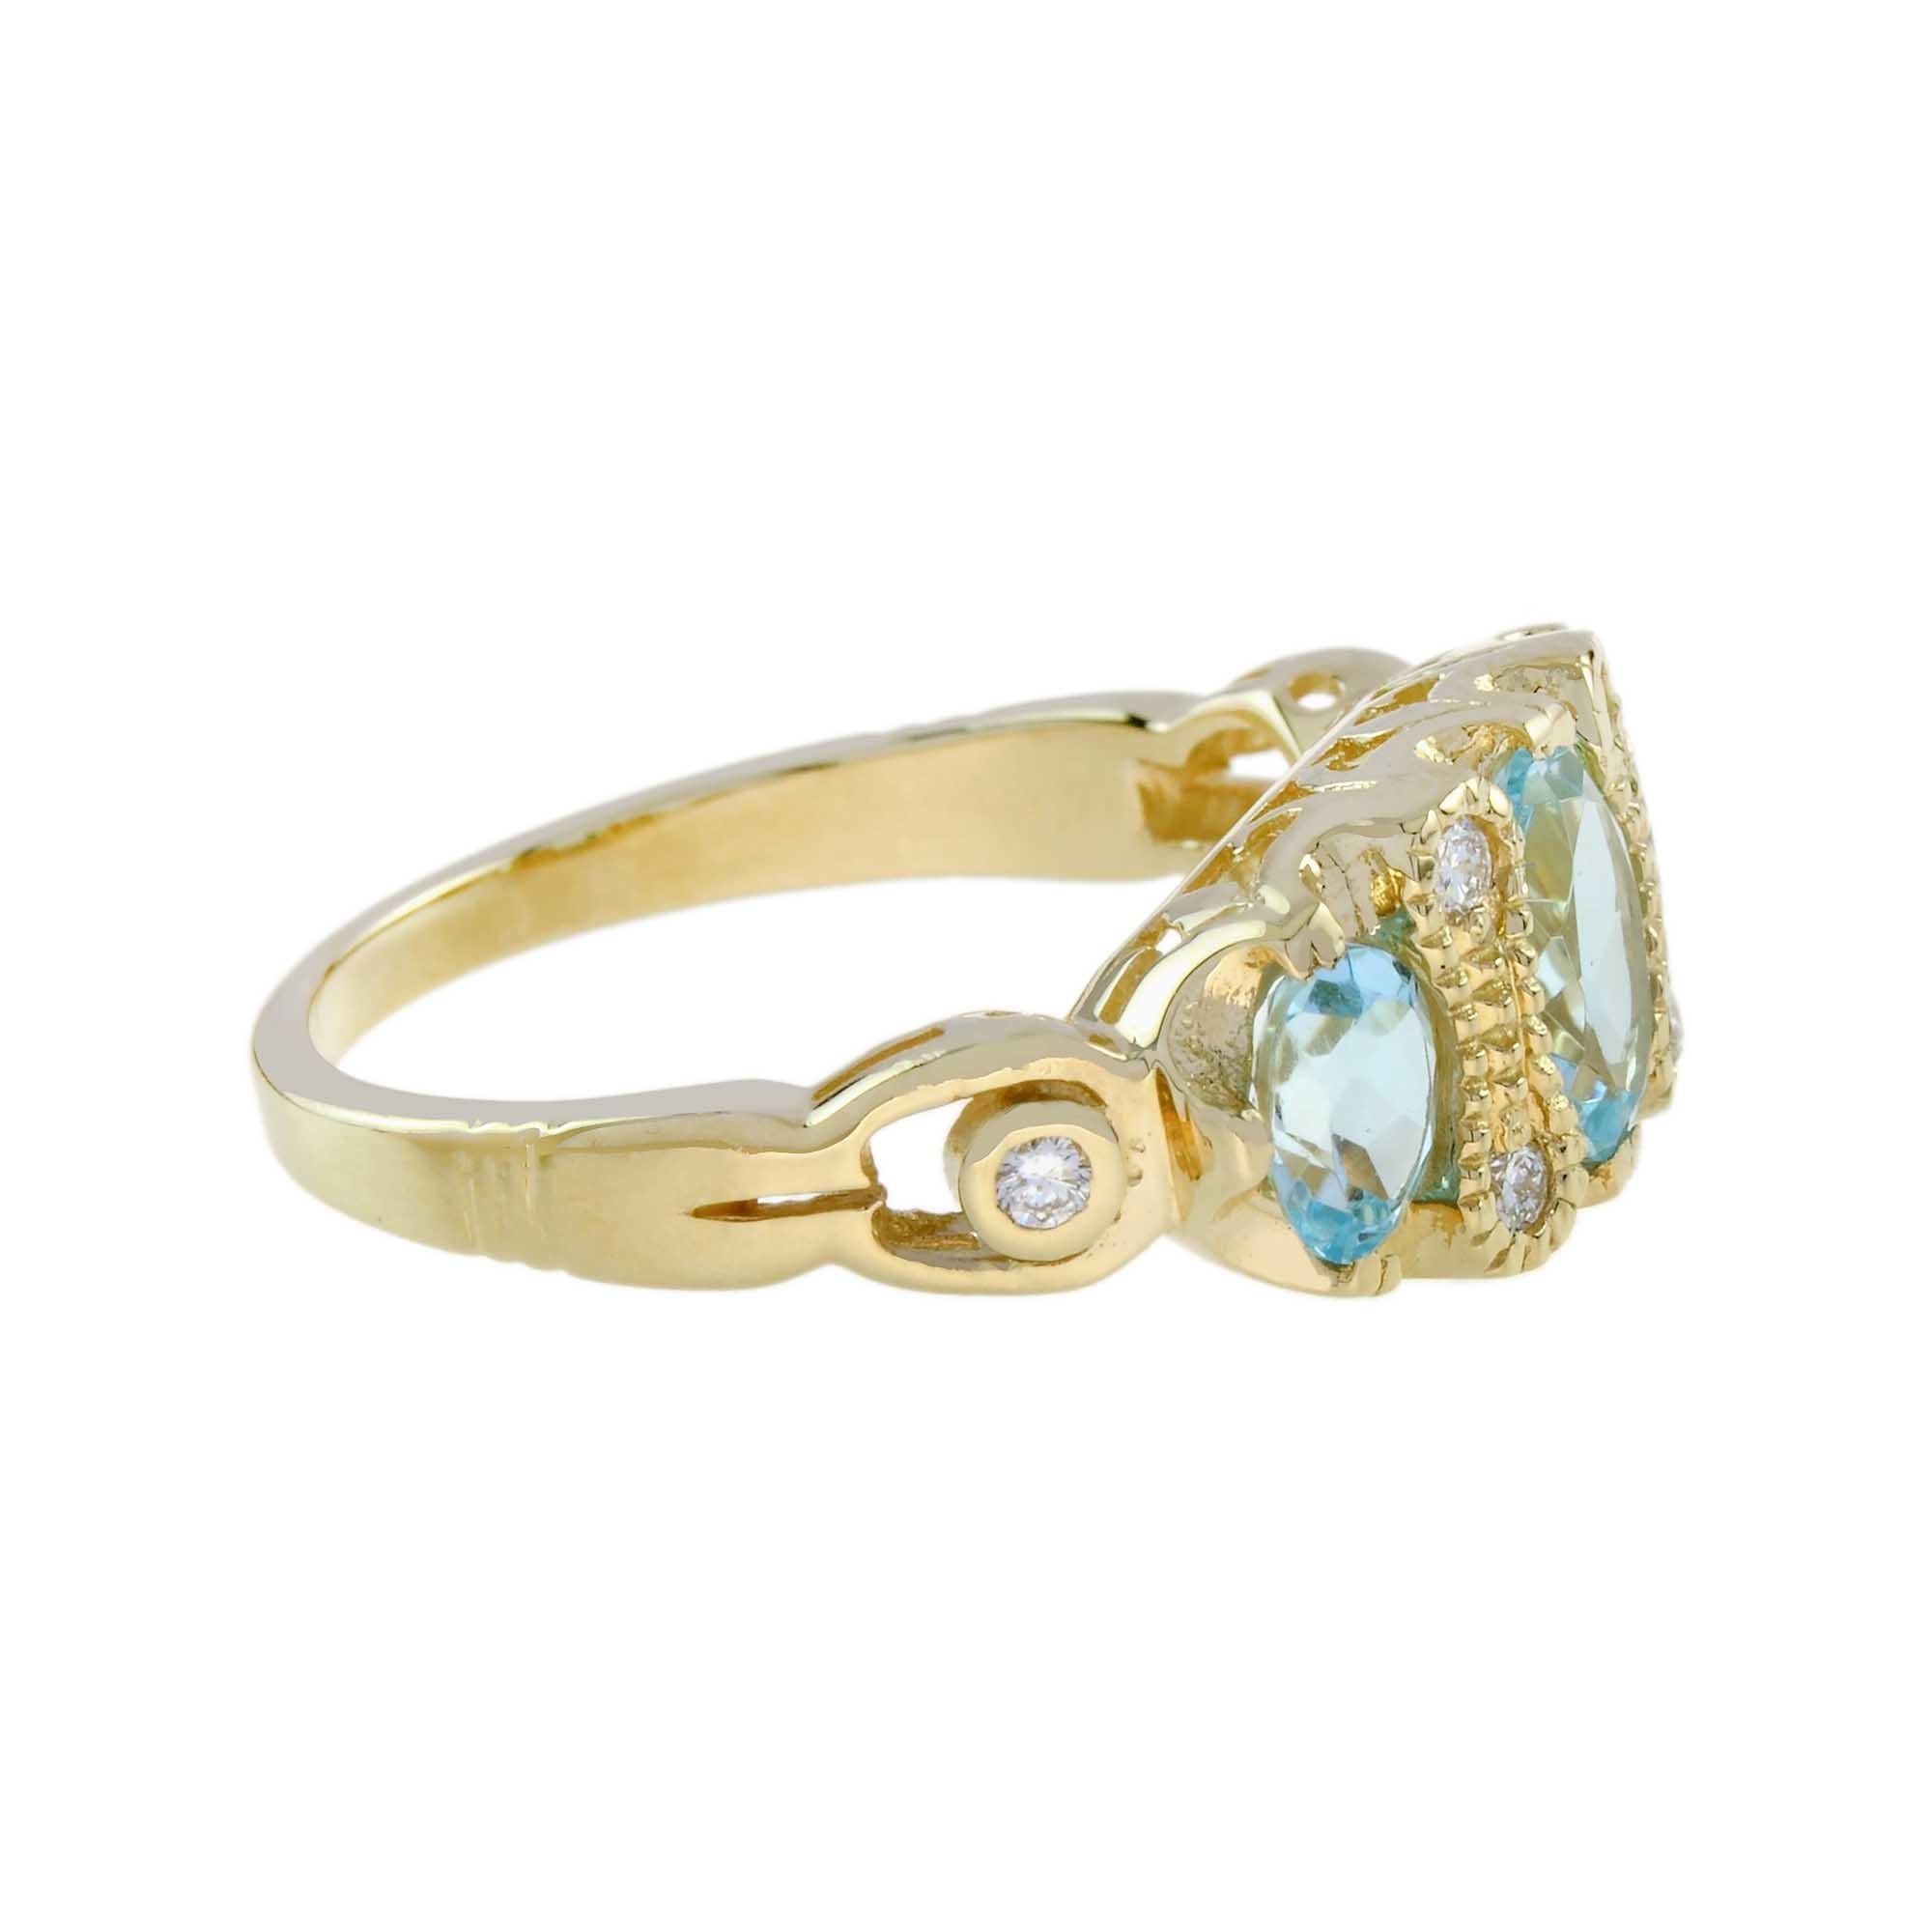 For Sale:  Blue Topaz and Diamond Vintage Style Three Stone Ring in 9K Yellow Gold 4